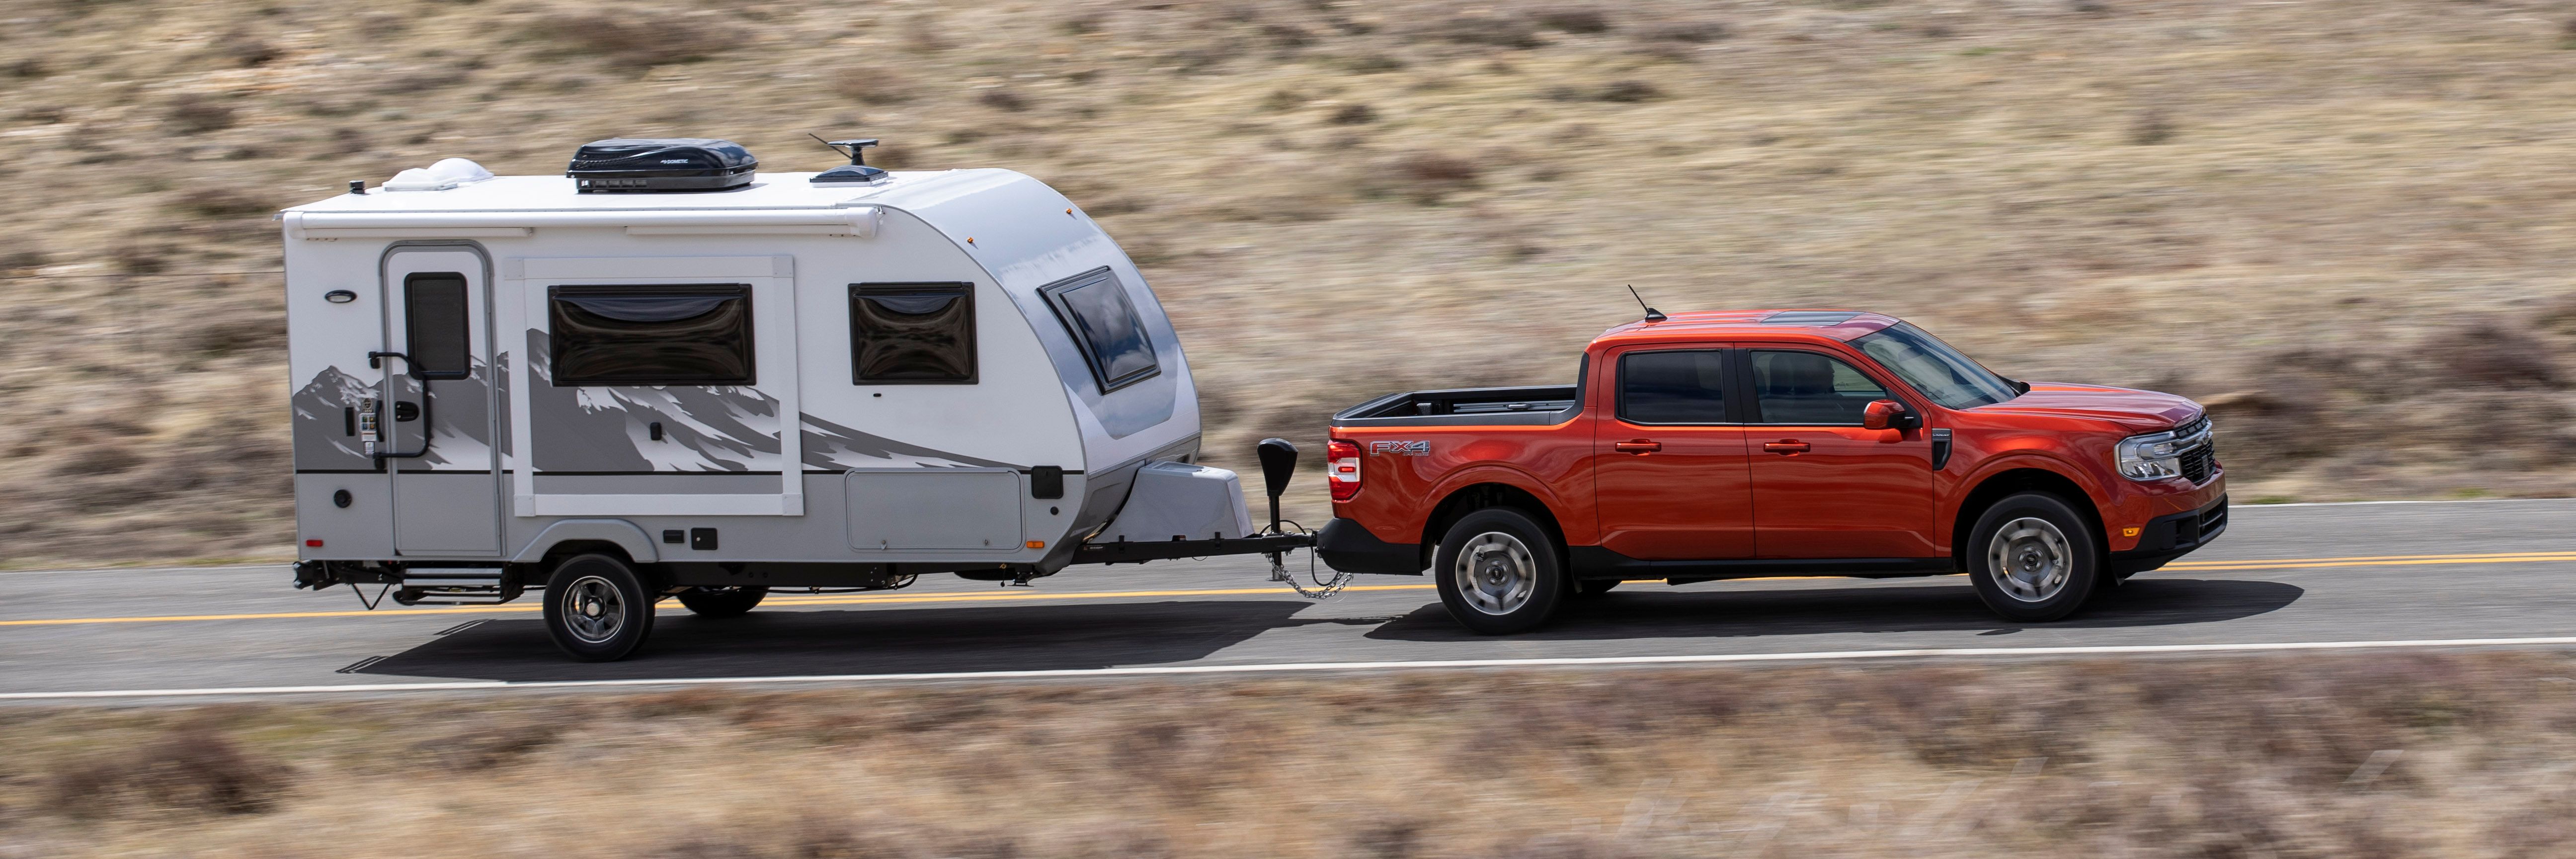 The 2022 Ford Maverick tows a trailer.